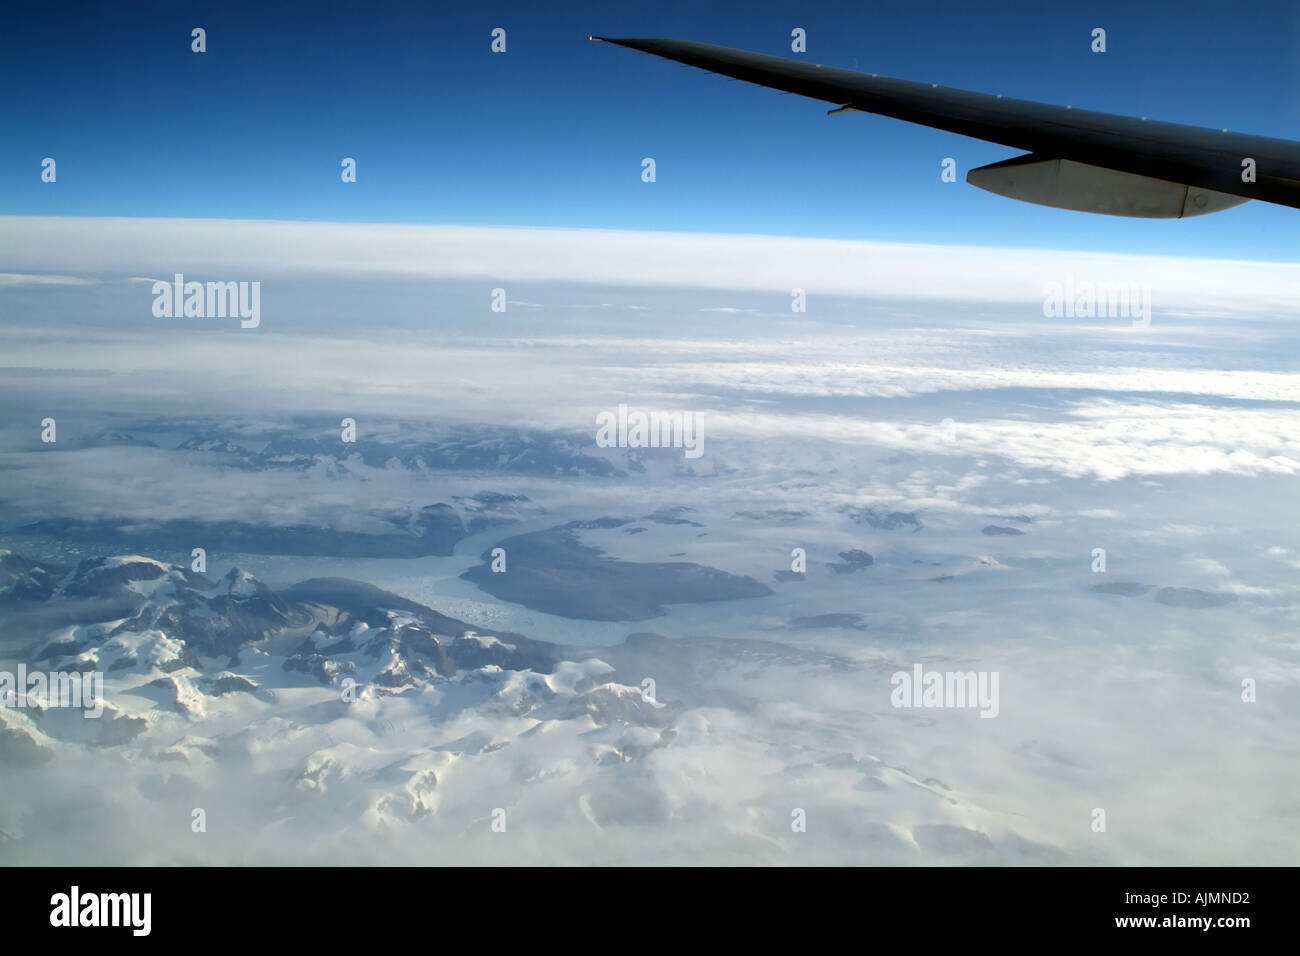 Southern Greenland landscape below wingtip of Boeing 777 aircraft Stock Photo